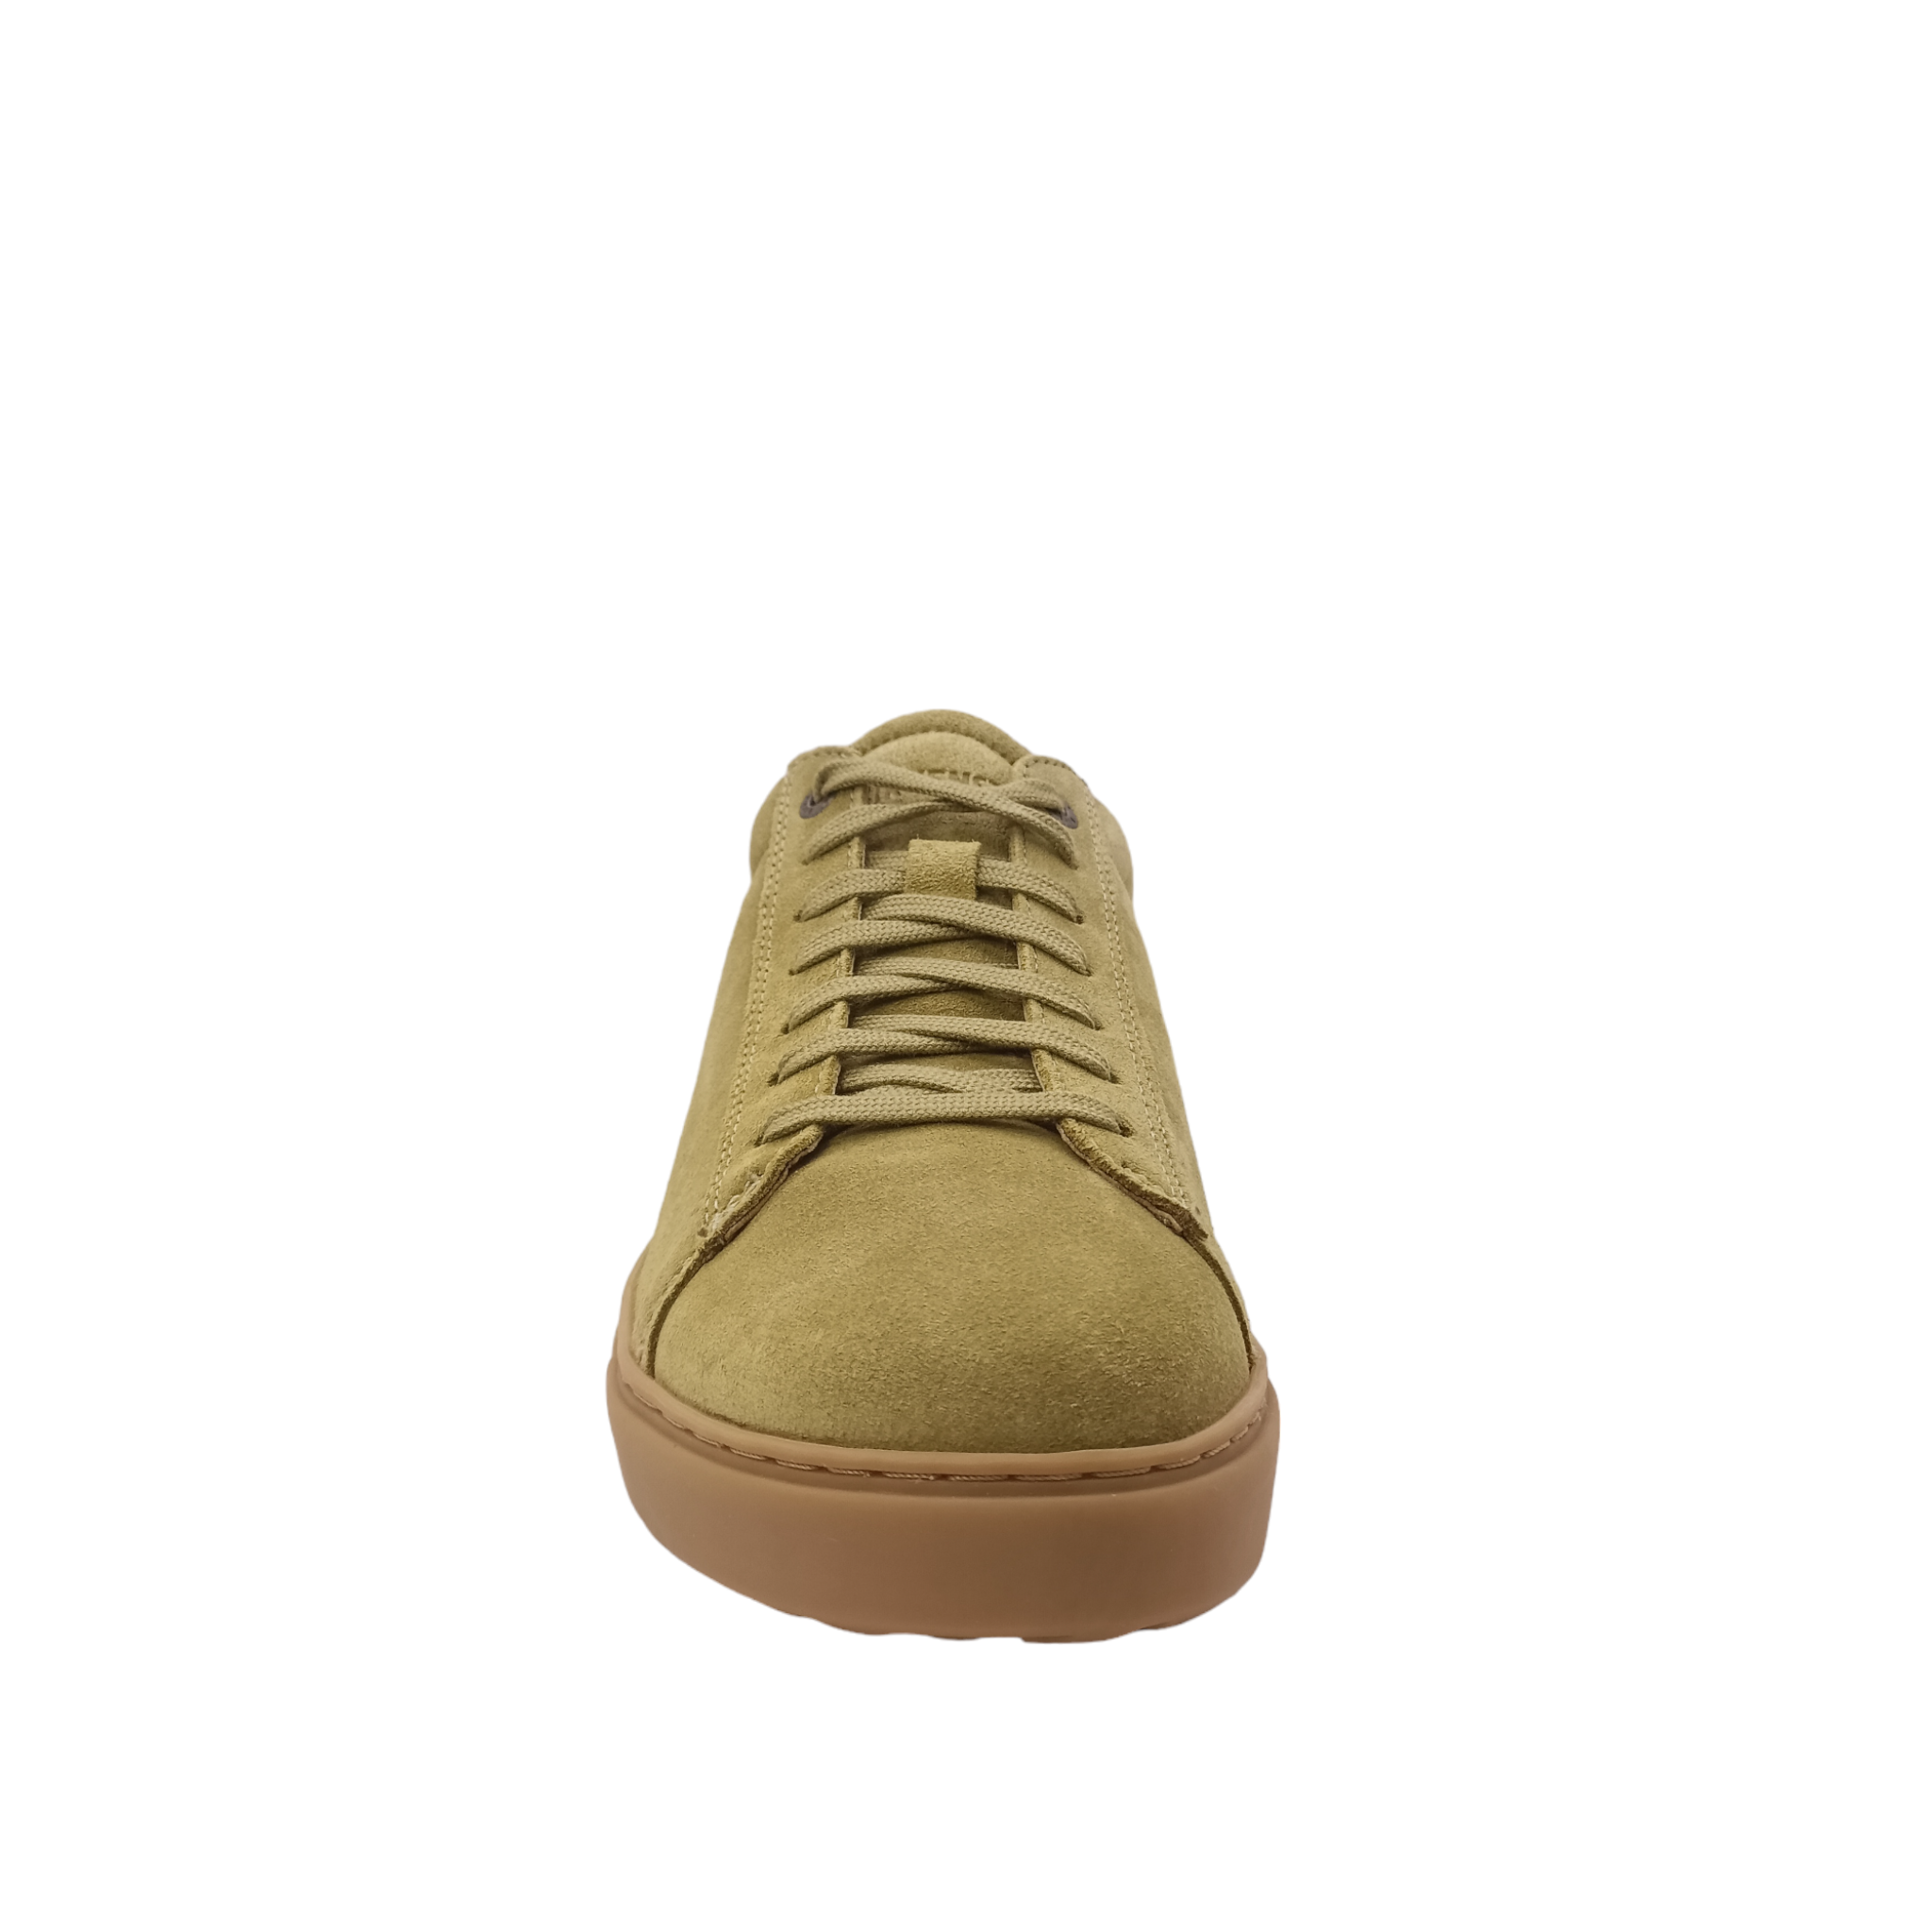 Shop Women's Birkenstock shoes. front view of Khaki Suede Sneaker with tan coloured sole with a small cork line around the heel. Green Laces with a padded heel. Shop Birkenstock Shoes Online and In-store with shoe&me Mount Maunganui NZ